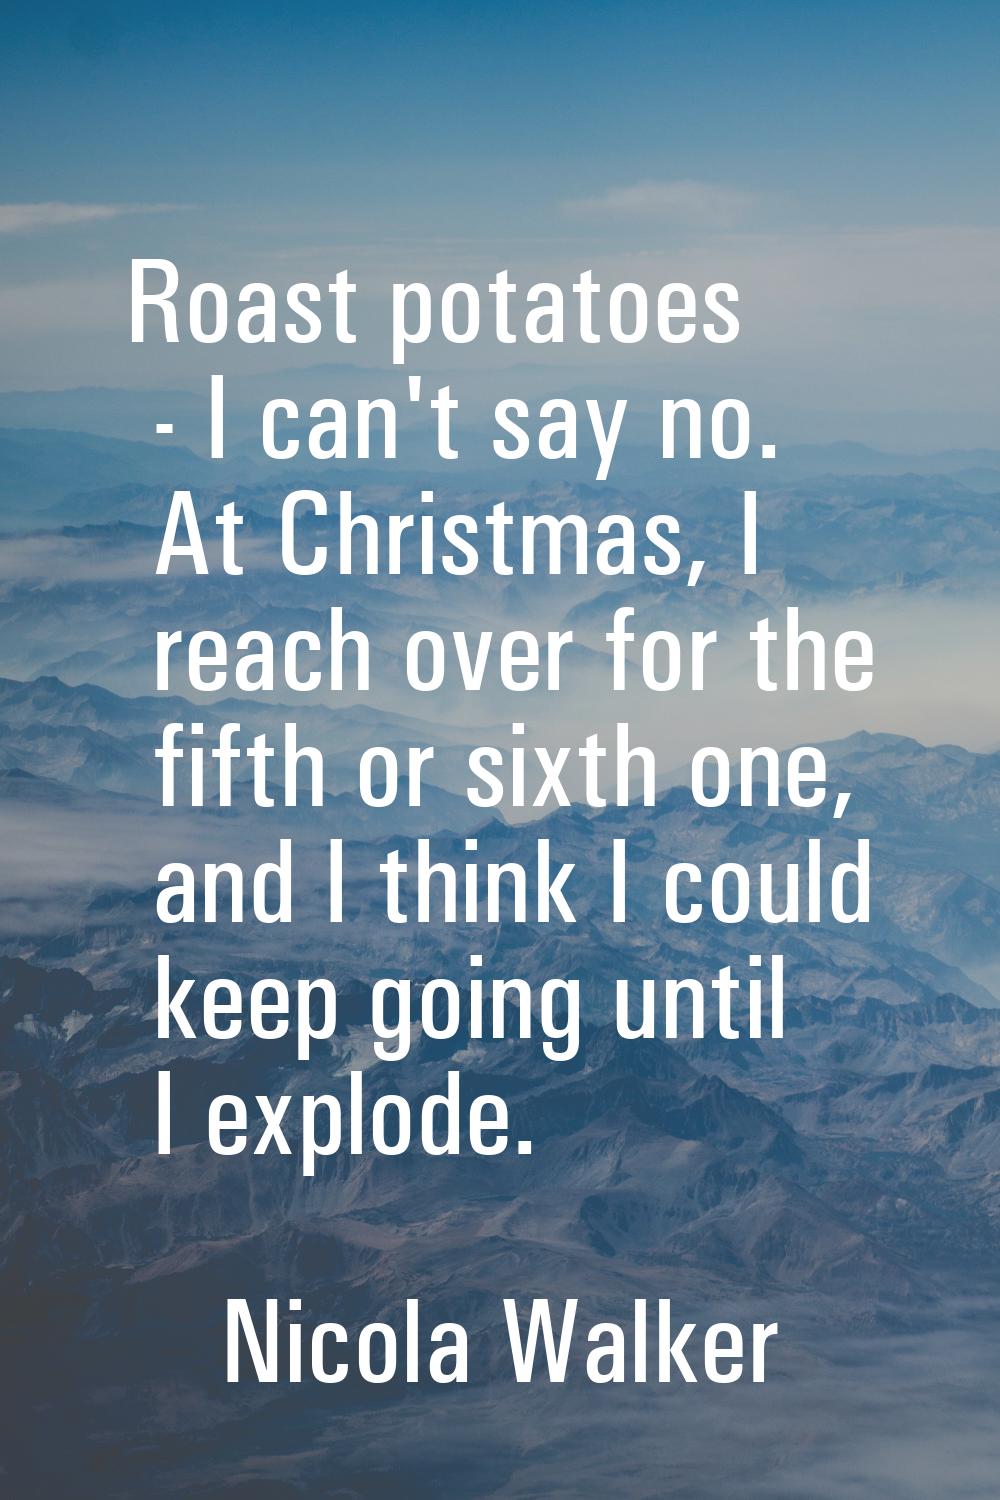 Roast potatoes - I can't say no. At Christmas, I reach over for the fifth or sixth one, and I think